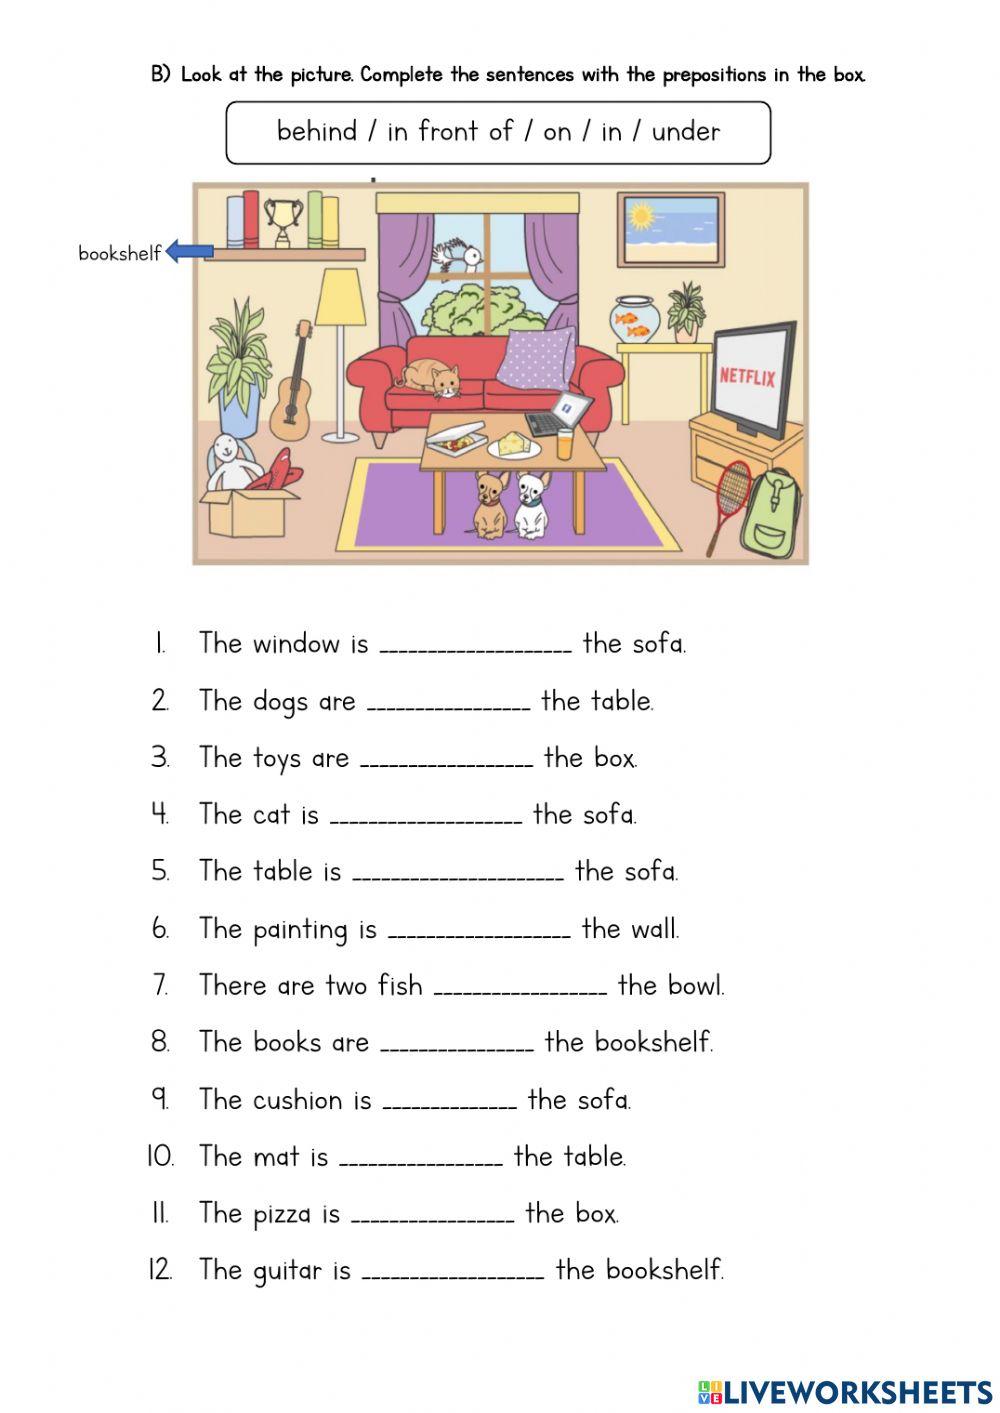 Year 3 Module 5 - Prepositions of Place